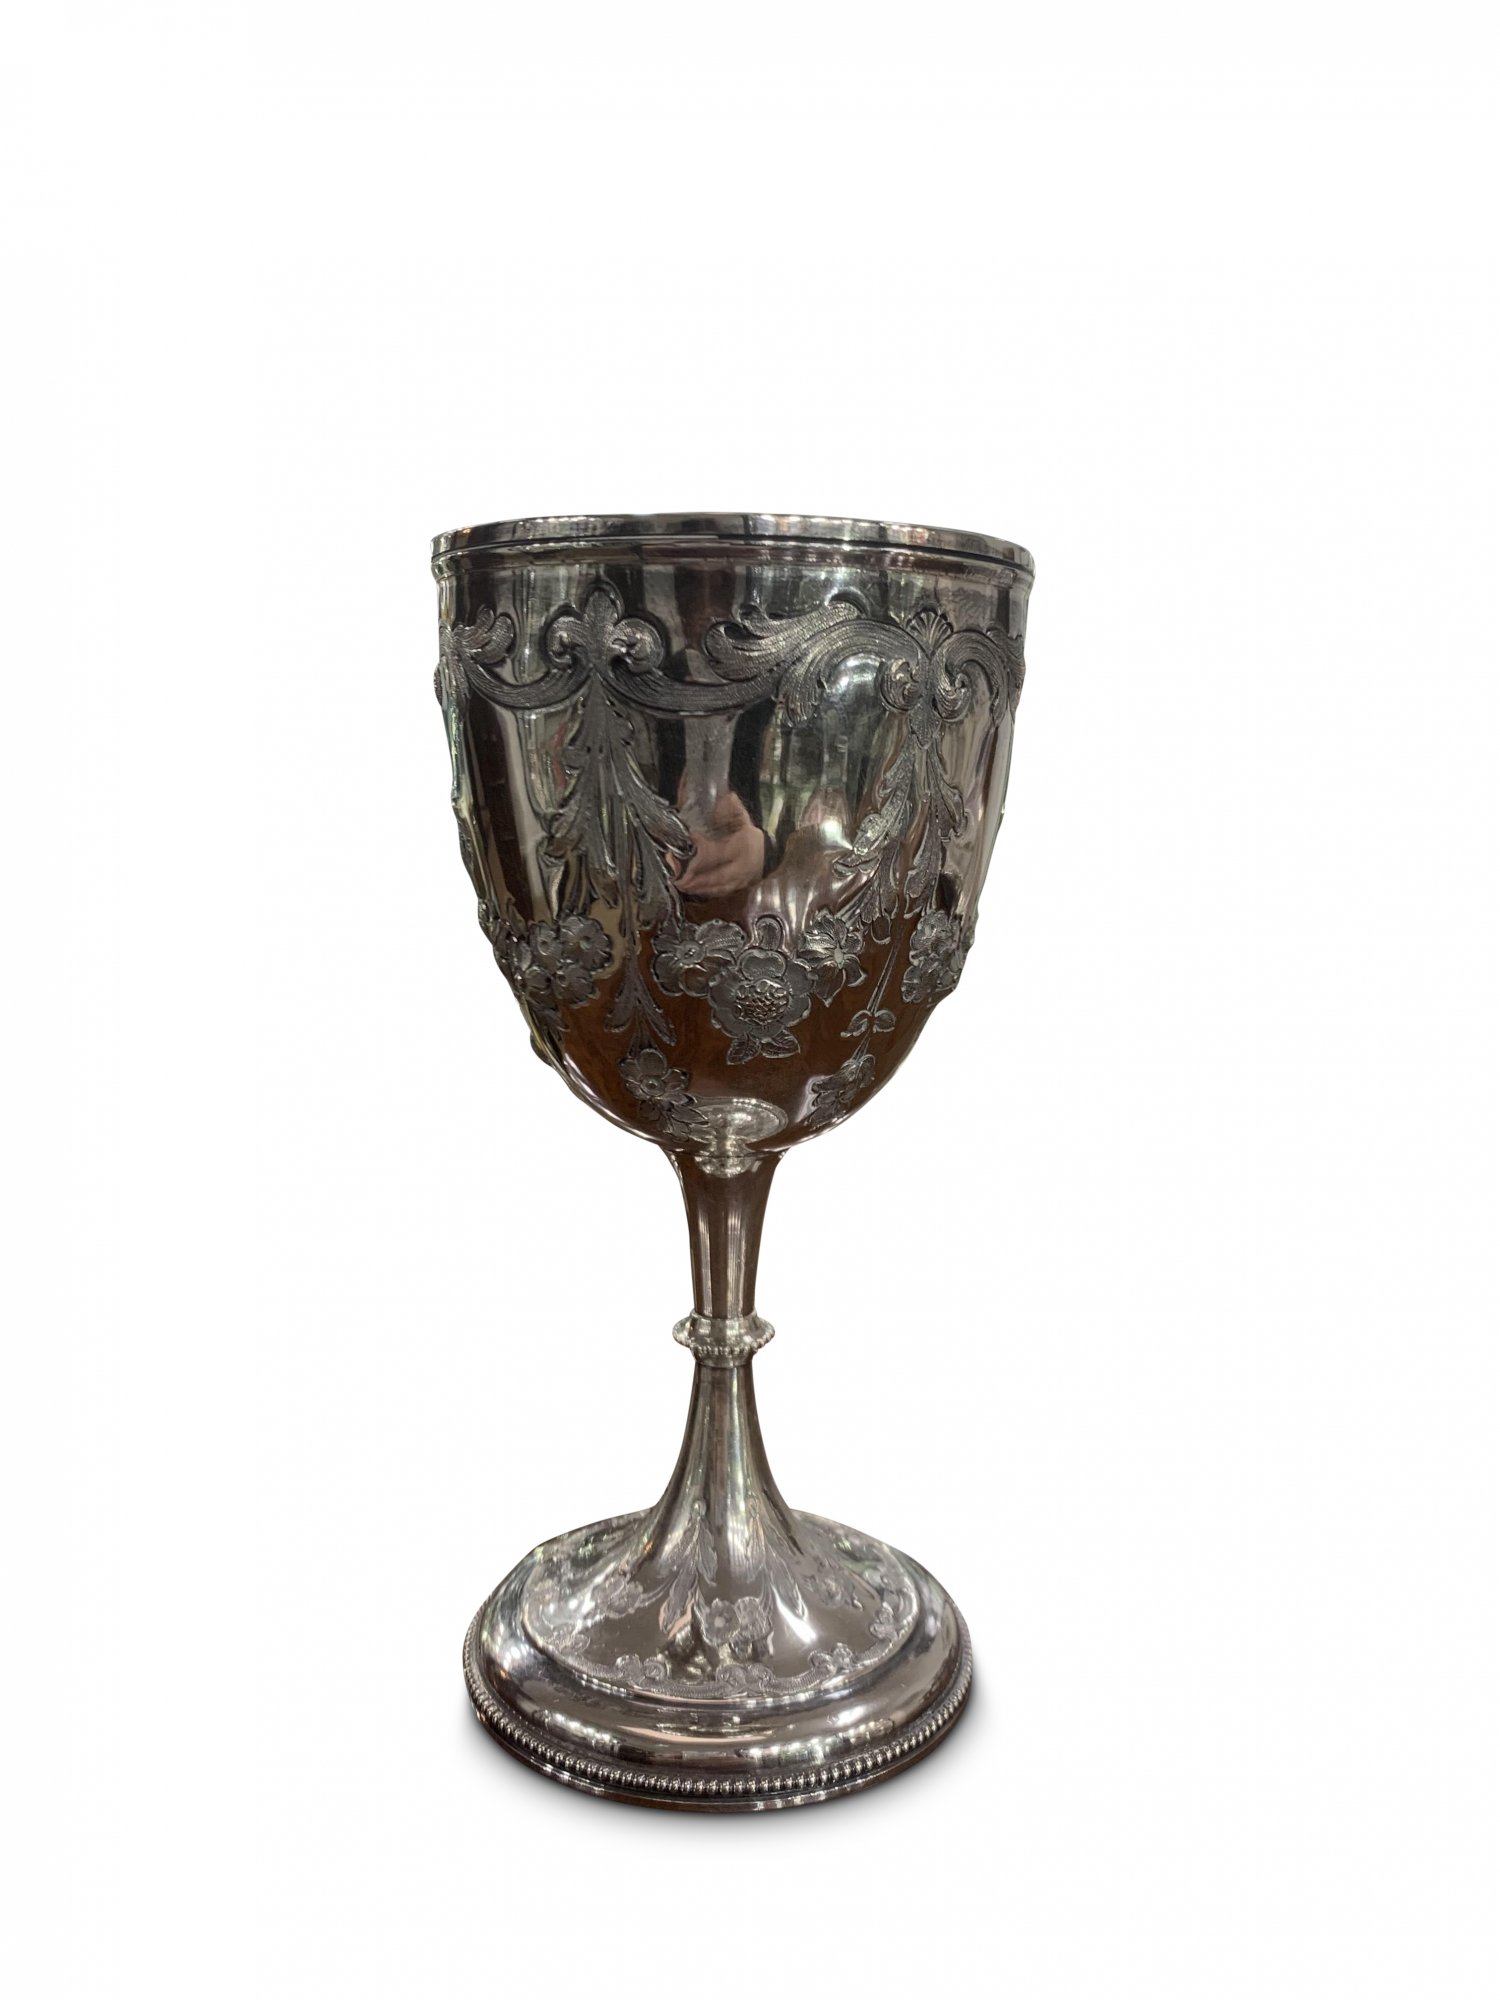 English Sterling Silver Embossed Goblet